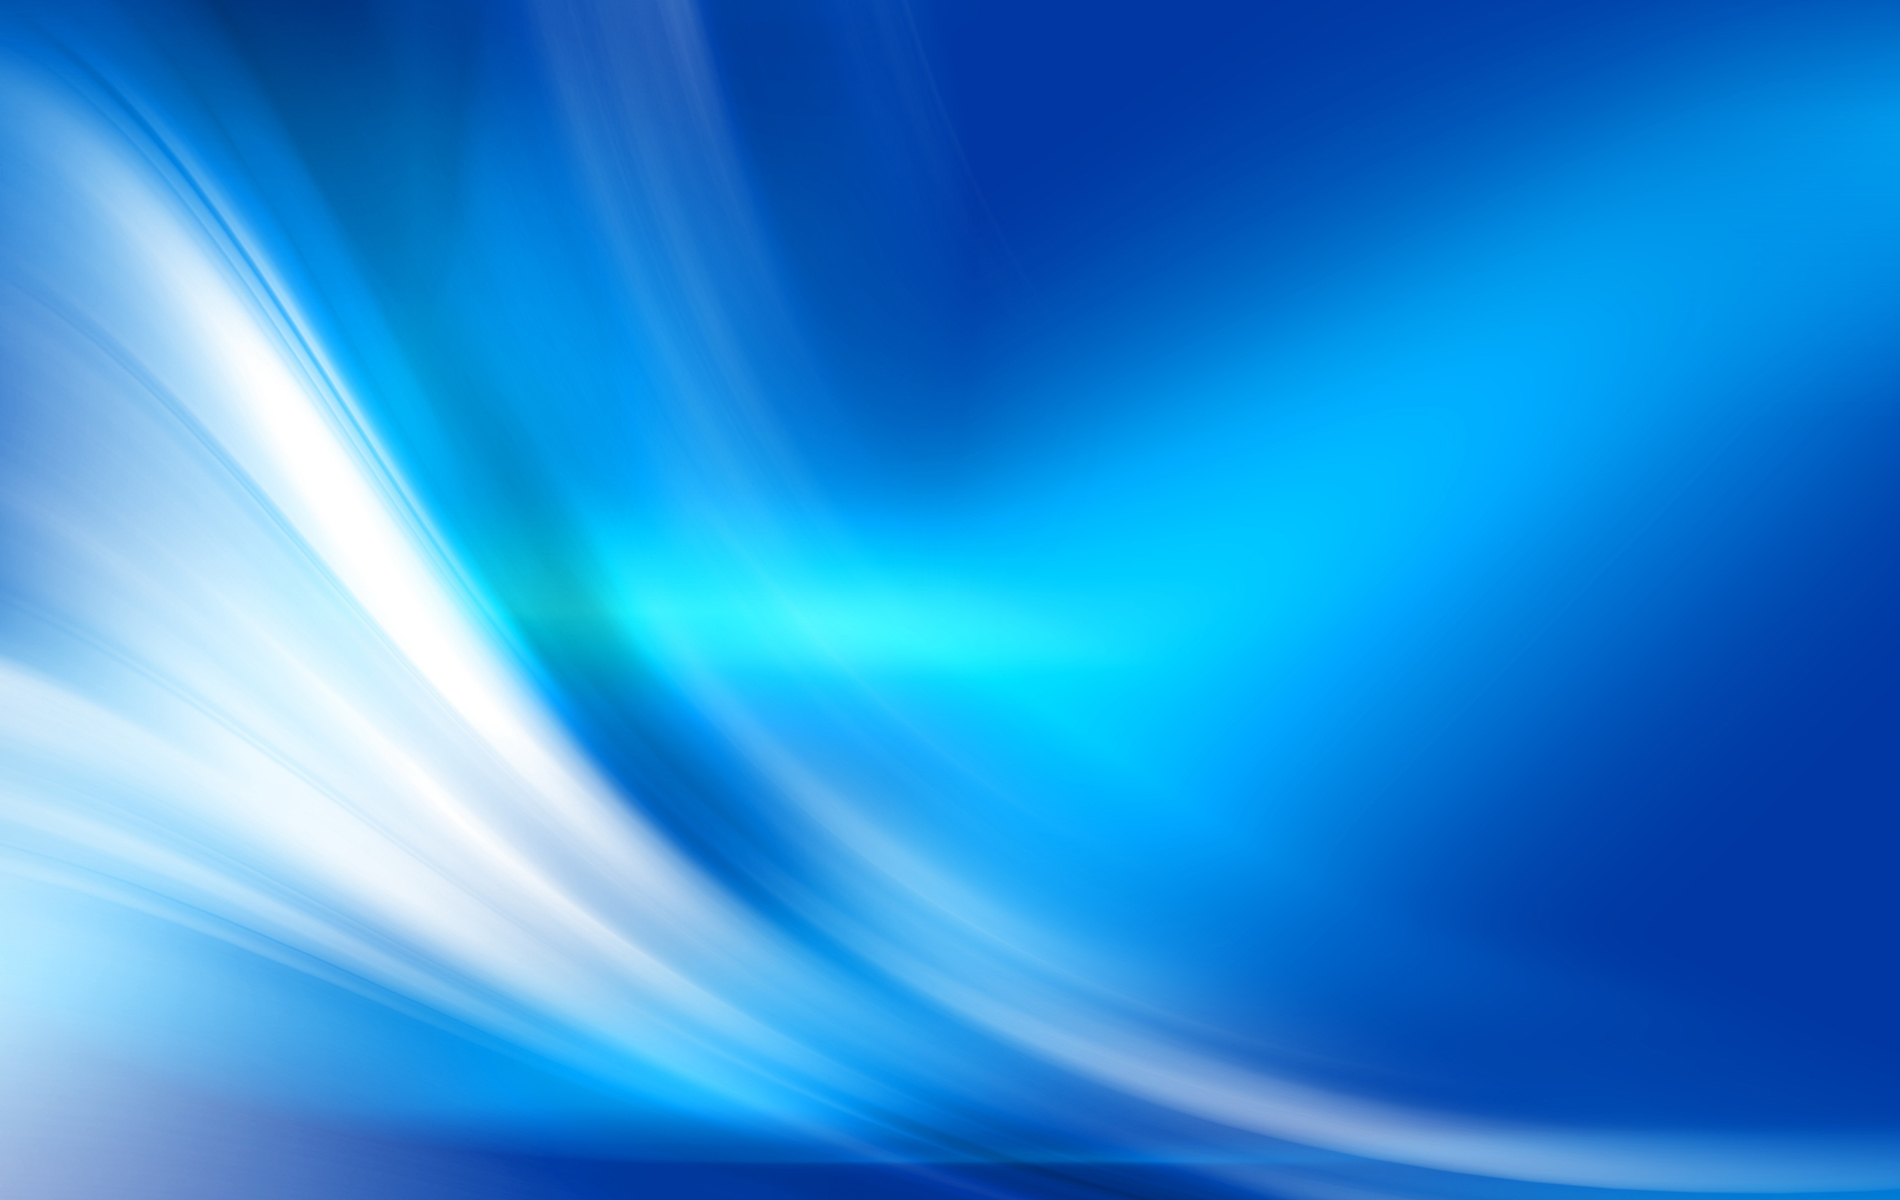 Free Download Windows 10 Desktop Background In 1920x1200 With Blue